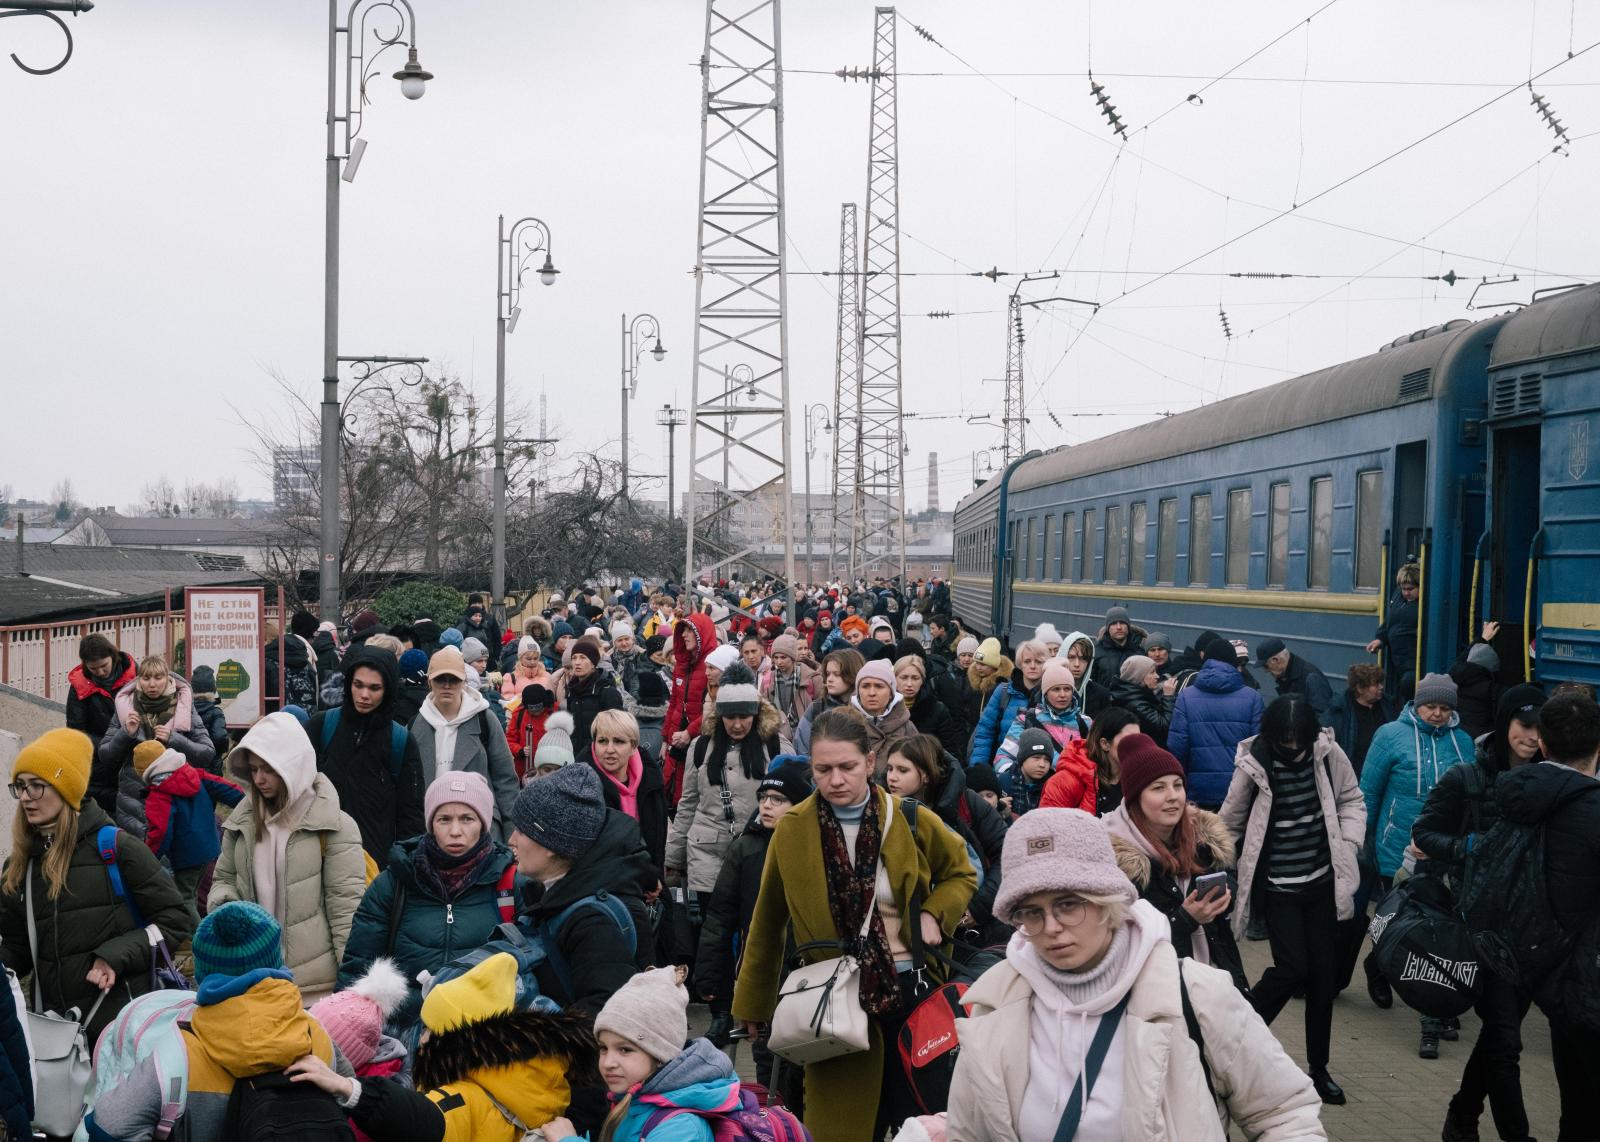 People arrive on trains from ea...th, 2022 - Lviv Central Station